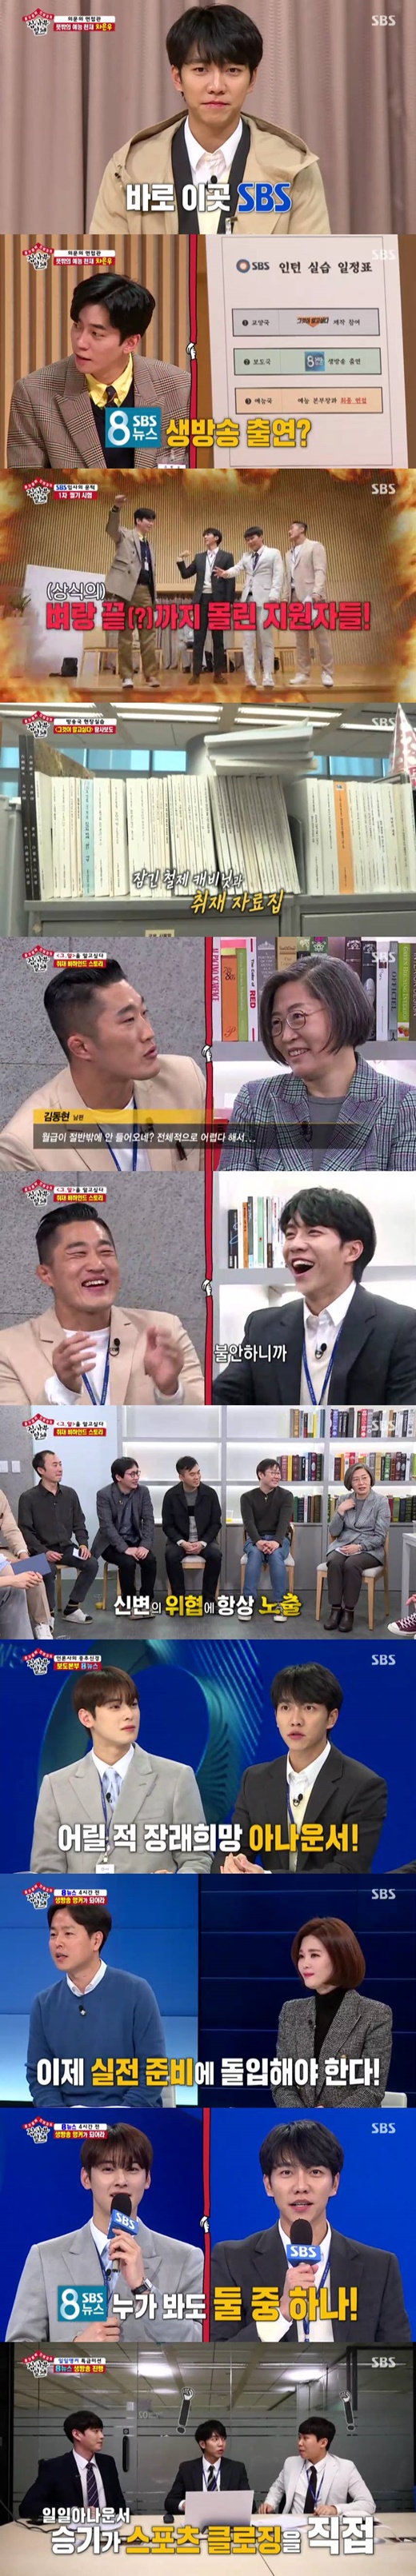 SBS entertainment program All The Butlers Lee Seung-gi, Shin Sung-rok, Yang Se-hyeong, Kim Dong-Hyun and Cha Eun-woo transformed into the station The Internet Temple.According to Nielsen Korea on the 20th, All The Butlers, which was broadcast on the 19th, recorded 6.1% of household ratings, 2.8% of 2049 target ratings, which are important indicators of the people concerned and lead the topic, and the highest audience rating per minute rose to 8%.The show was featured in a 24 oclock special feature on the station that tours the SBS Cultural Bureau, the Press Bureau and the Arts Bureau.Lee Seung-gi, Shin Sung-rok, Yang Se-hyeong and daily students Cha Eun-woo and Kim Dong-Hyun turned into The Internet Temple and started on-site training at the station.The first place they found was SBSs representative exploration report program It wants to know.The office attracted attention because there was a huge amount of people in the field from the sketch of the suspect who was wanted on the spot to the reporter of the first broadcast in 1992.Yang Se-hyeong was surprised, saying, It is closer to an investigative agency than a broadcasting station.The members then participated in the interview of Prof. Lee Soo-jung, who has been appearing in It Wants to Know for about 20 years, said,  (from the production team) there is a really good quality person Ry.I do not cover the means and methods, and I will find and send all the records of the incident a few decades ago. Professor Lee Soo-jung also handed over the know-how of Lie Discrimination Method through role play with members.Kim Dong-Hyun and Lee Seung-gi laughed with a stupid lie, and Professor Lee Soo-jung gave tips to identify lies such as explanation becomes long and action patterns change when communicating.The members then visited the SBS 8 News studio, where Cha Eun-woo was excited, saying, I think I dreamed of an announcer early in junior high school.Hyun Woo and Choi Hye-rim Anchor, who met there, reported that the members were given the opportunity to participate in the live broadcast of SBS 8 News.The members conducted a mission to memorize and report an analizing test and news articles with the final one to participate in the live broadcast.Cha Eun-woo and Lee Seung-gi showed off their perfect skills, especially Lee Seung-gi, who received praise from Hyun Woo Anchor for closest to the most newstones in a stable tone, followed by a perfect memory of the article in a short time and was impressed by reporting it.Eventually Lee Seung-gi was in charge of broadcasting sports news live.On the other hand, Lee Seung-gi was nervous in the preliminary video, and he was actually involved in live news, raising expectations for next weeks broadcast.